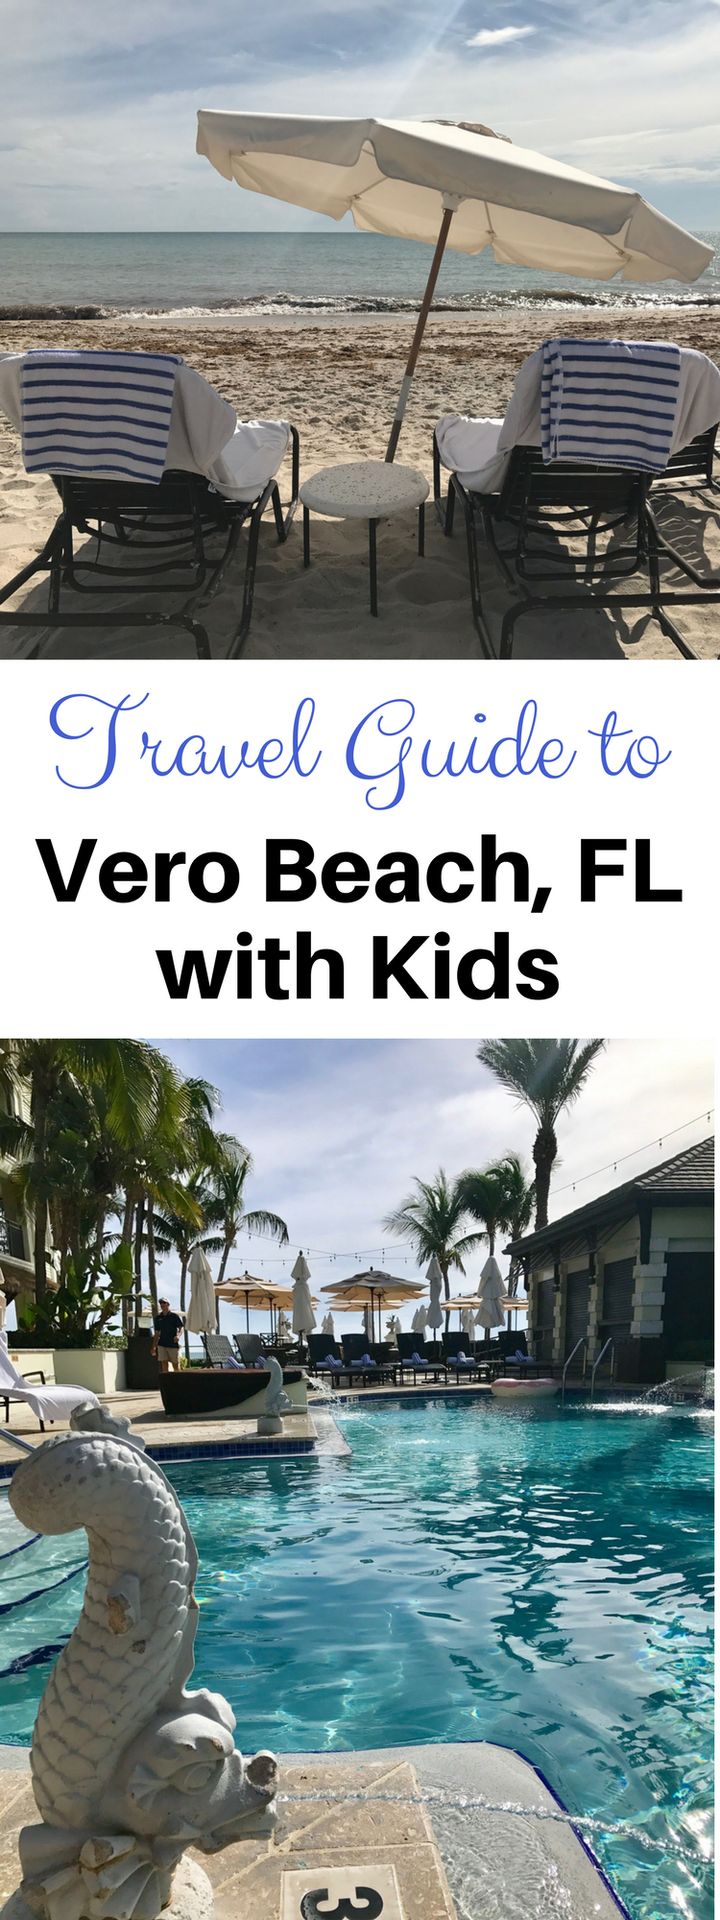 <p>Family Travel Guide to Vero Beach Florida with Kids</p>